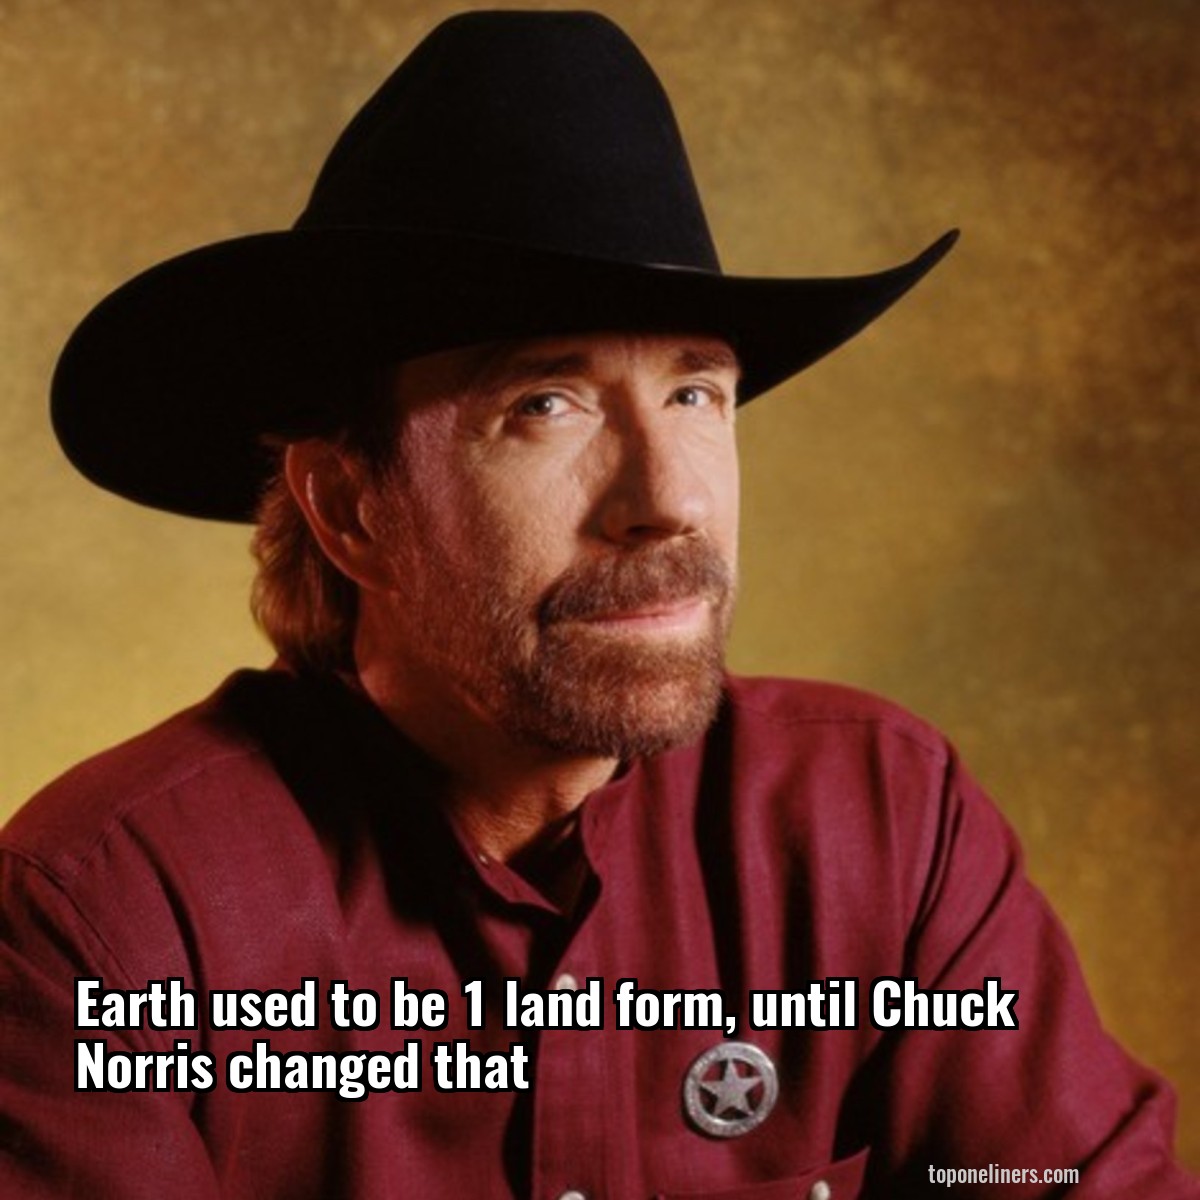 Earth used to be 1 land form, until Chuck Norris changed that